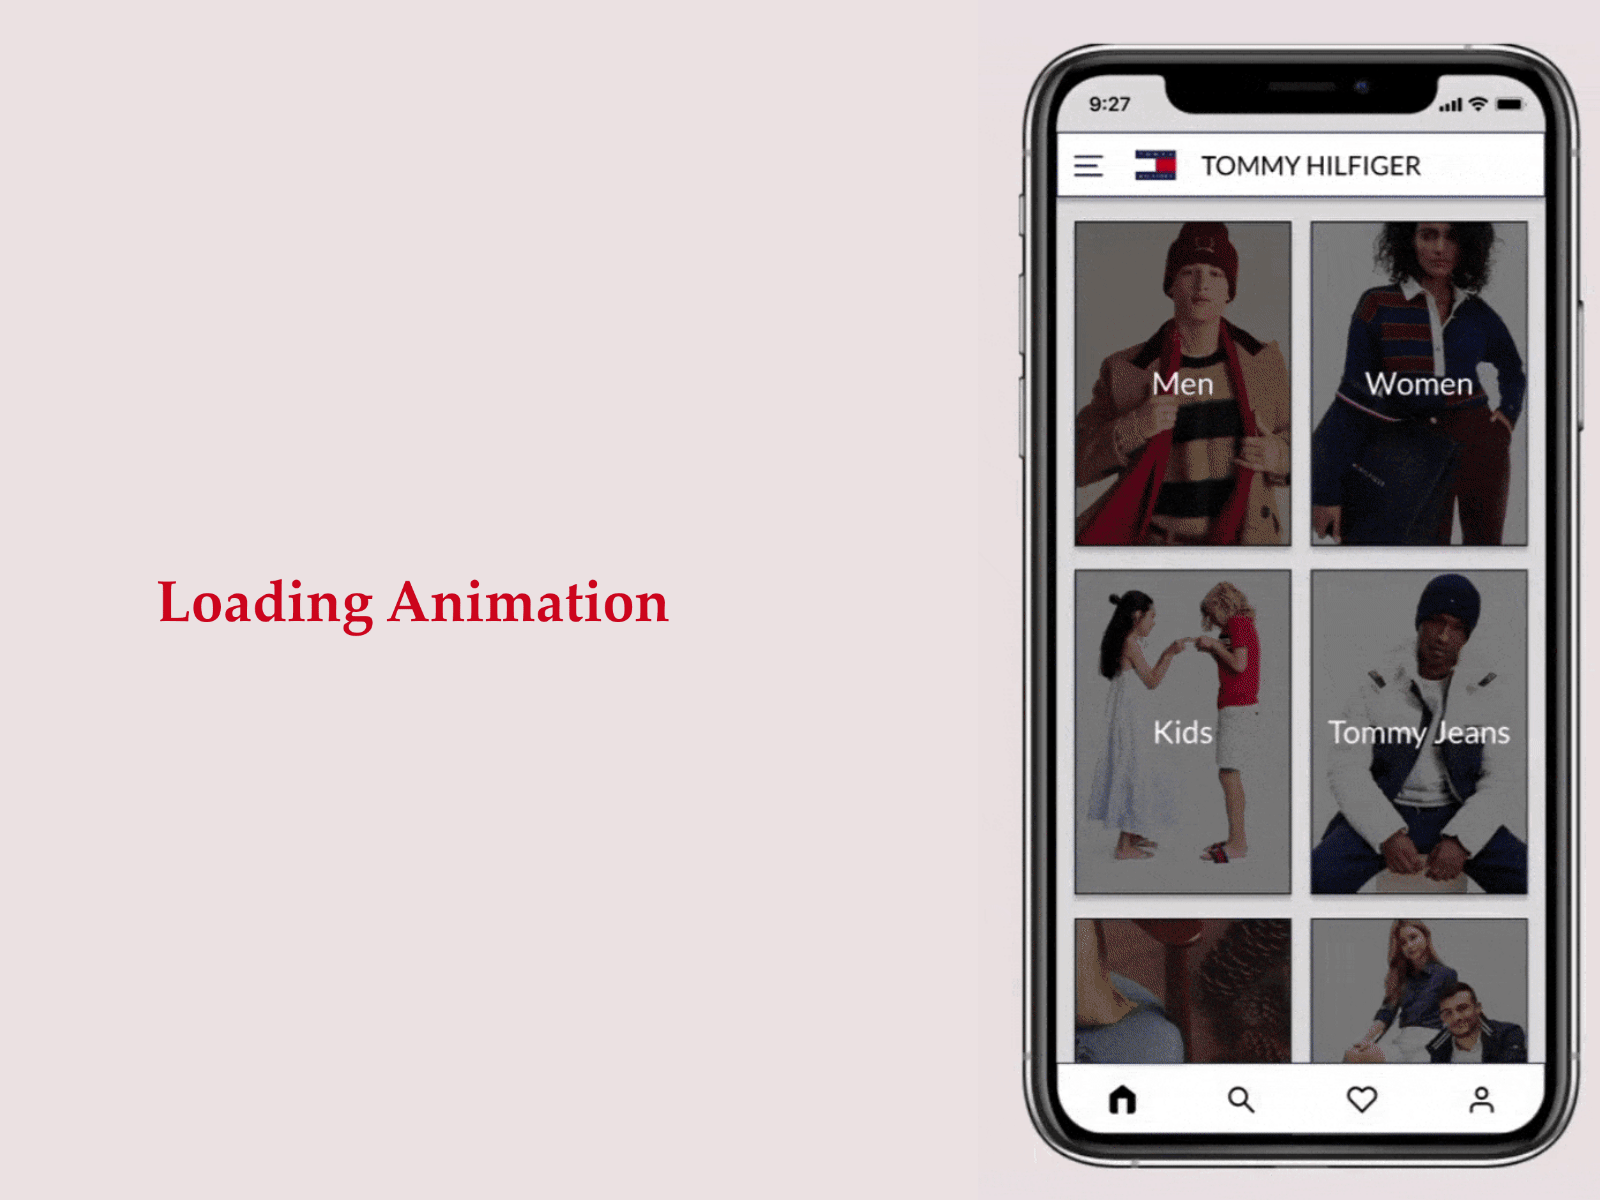 Loading animation for Tommy Hilfiger app app appdesign casestudy design interaction design interactive loading animation loading screen ui uidesign uiux